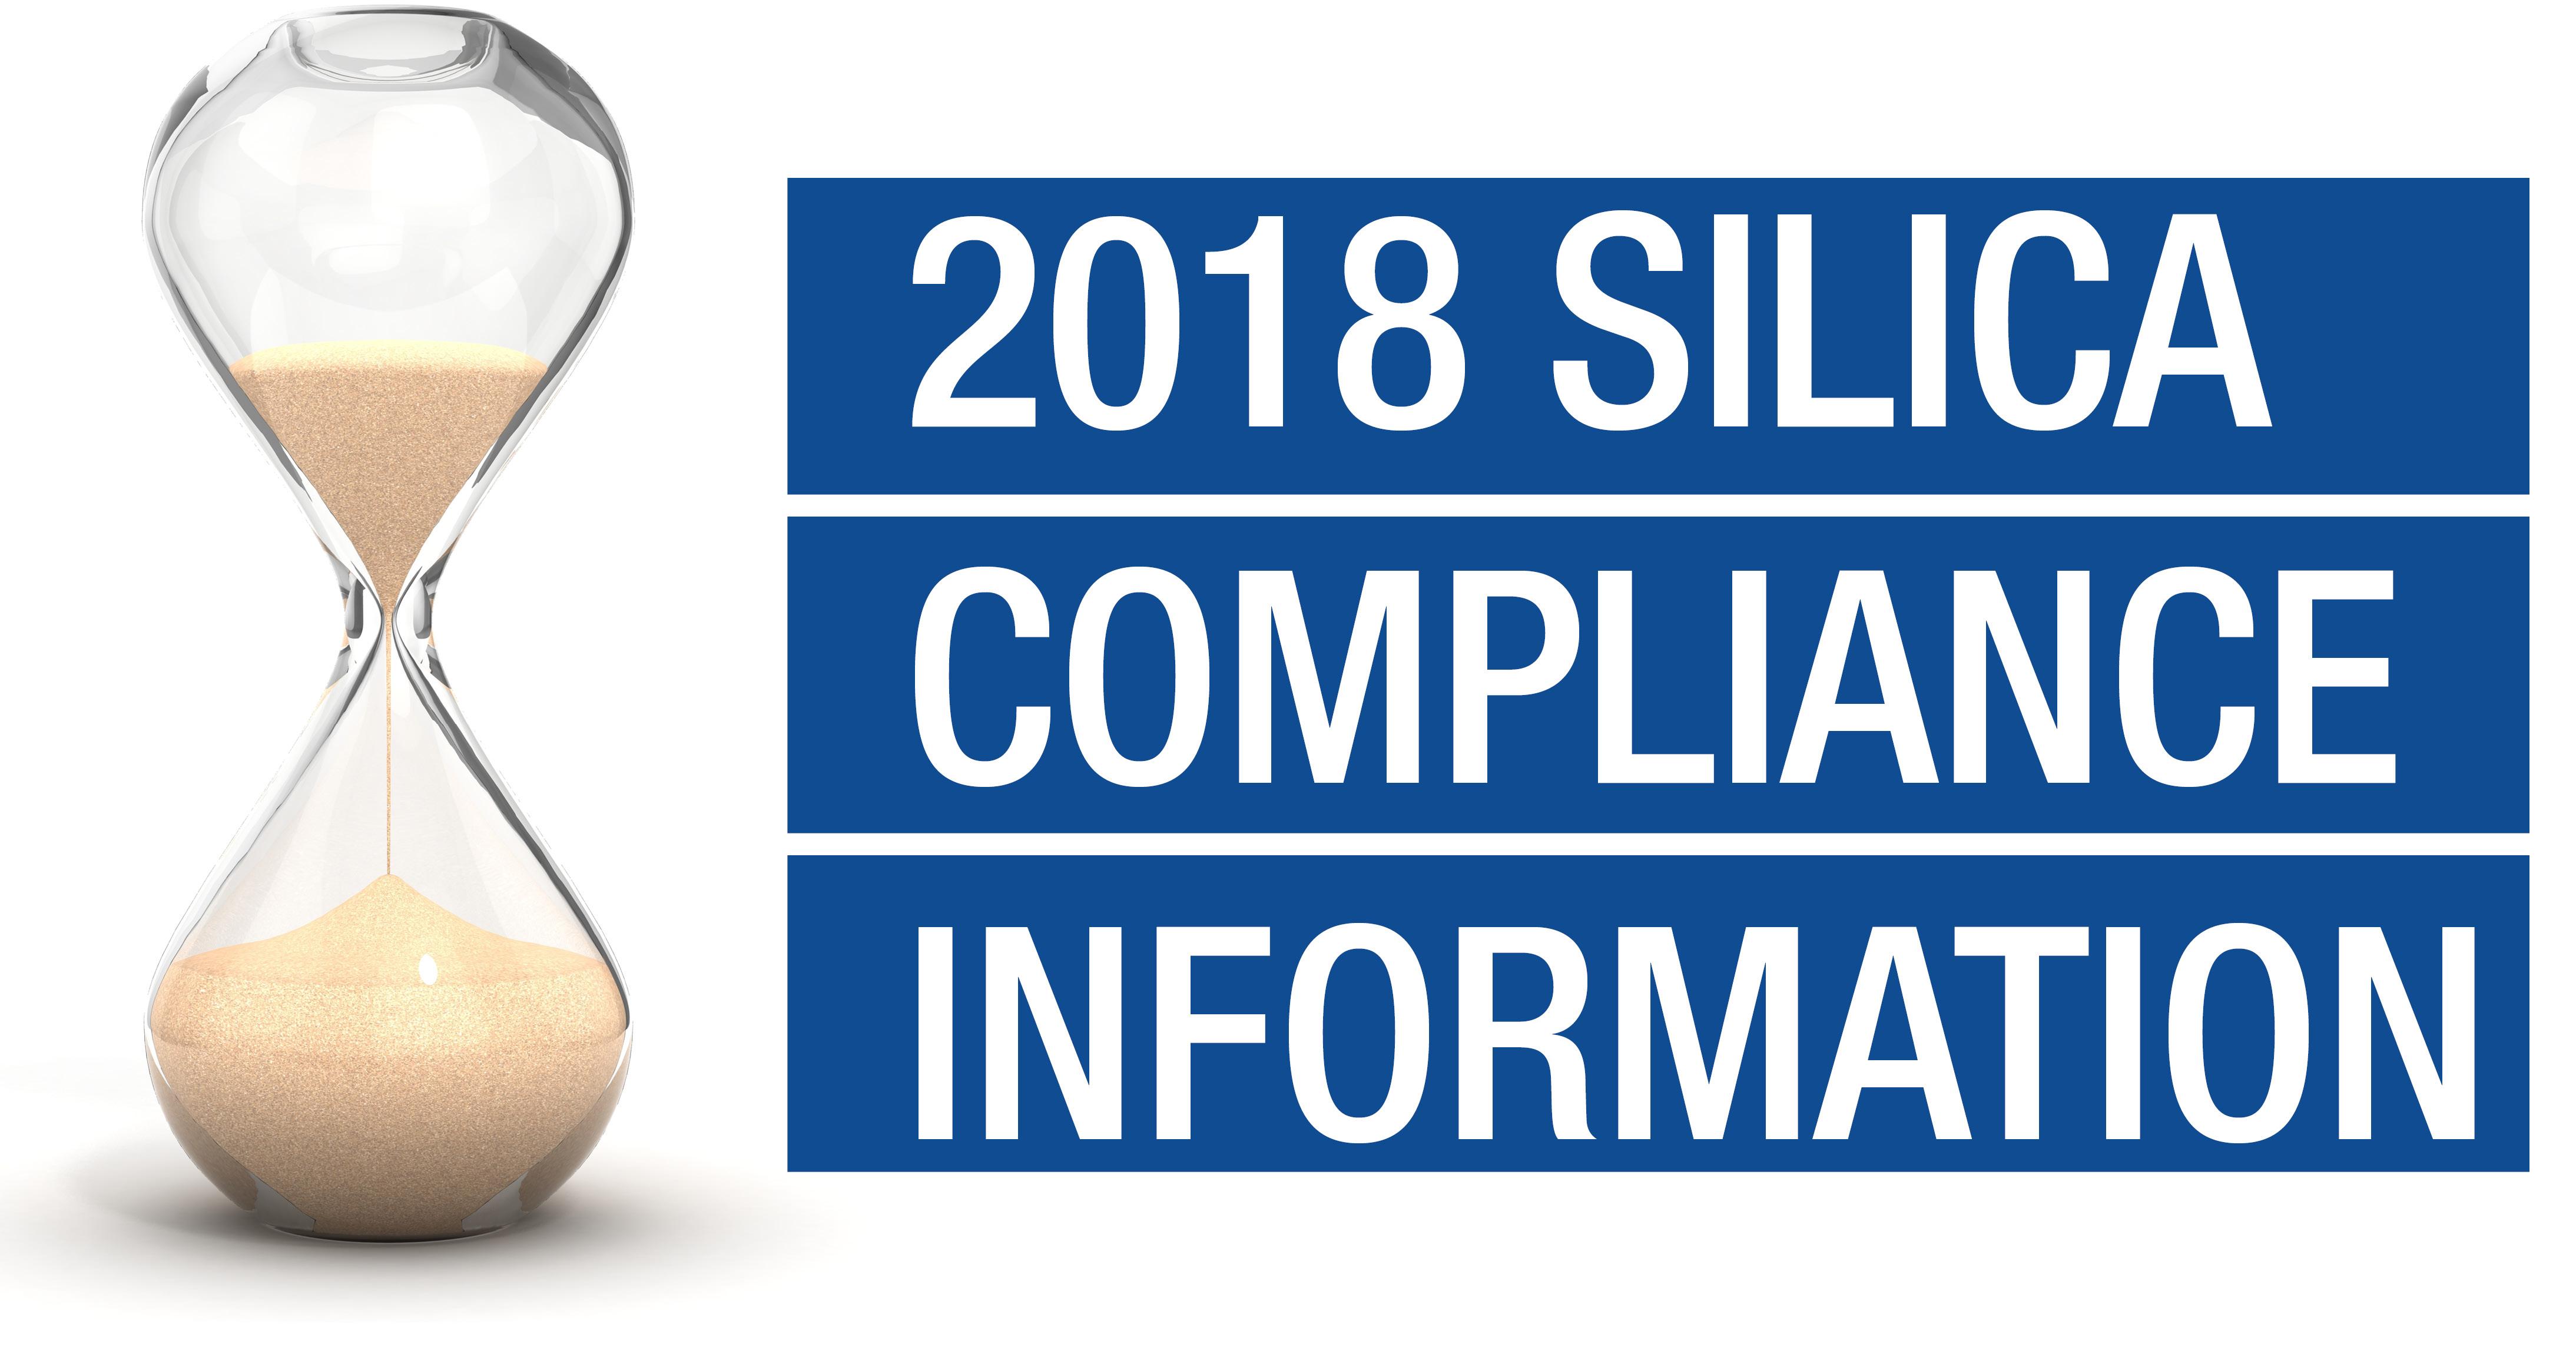 2018 Silica Compliance Information